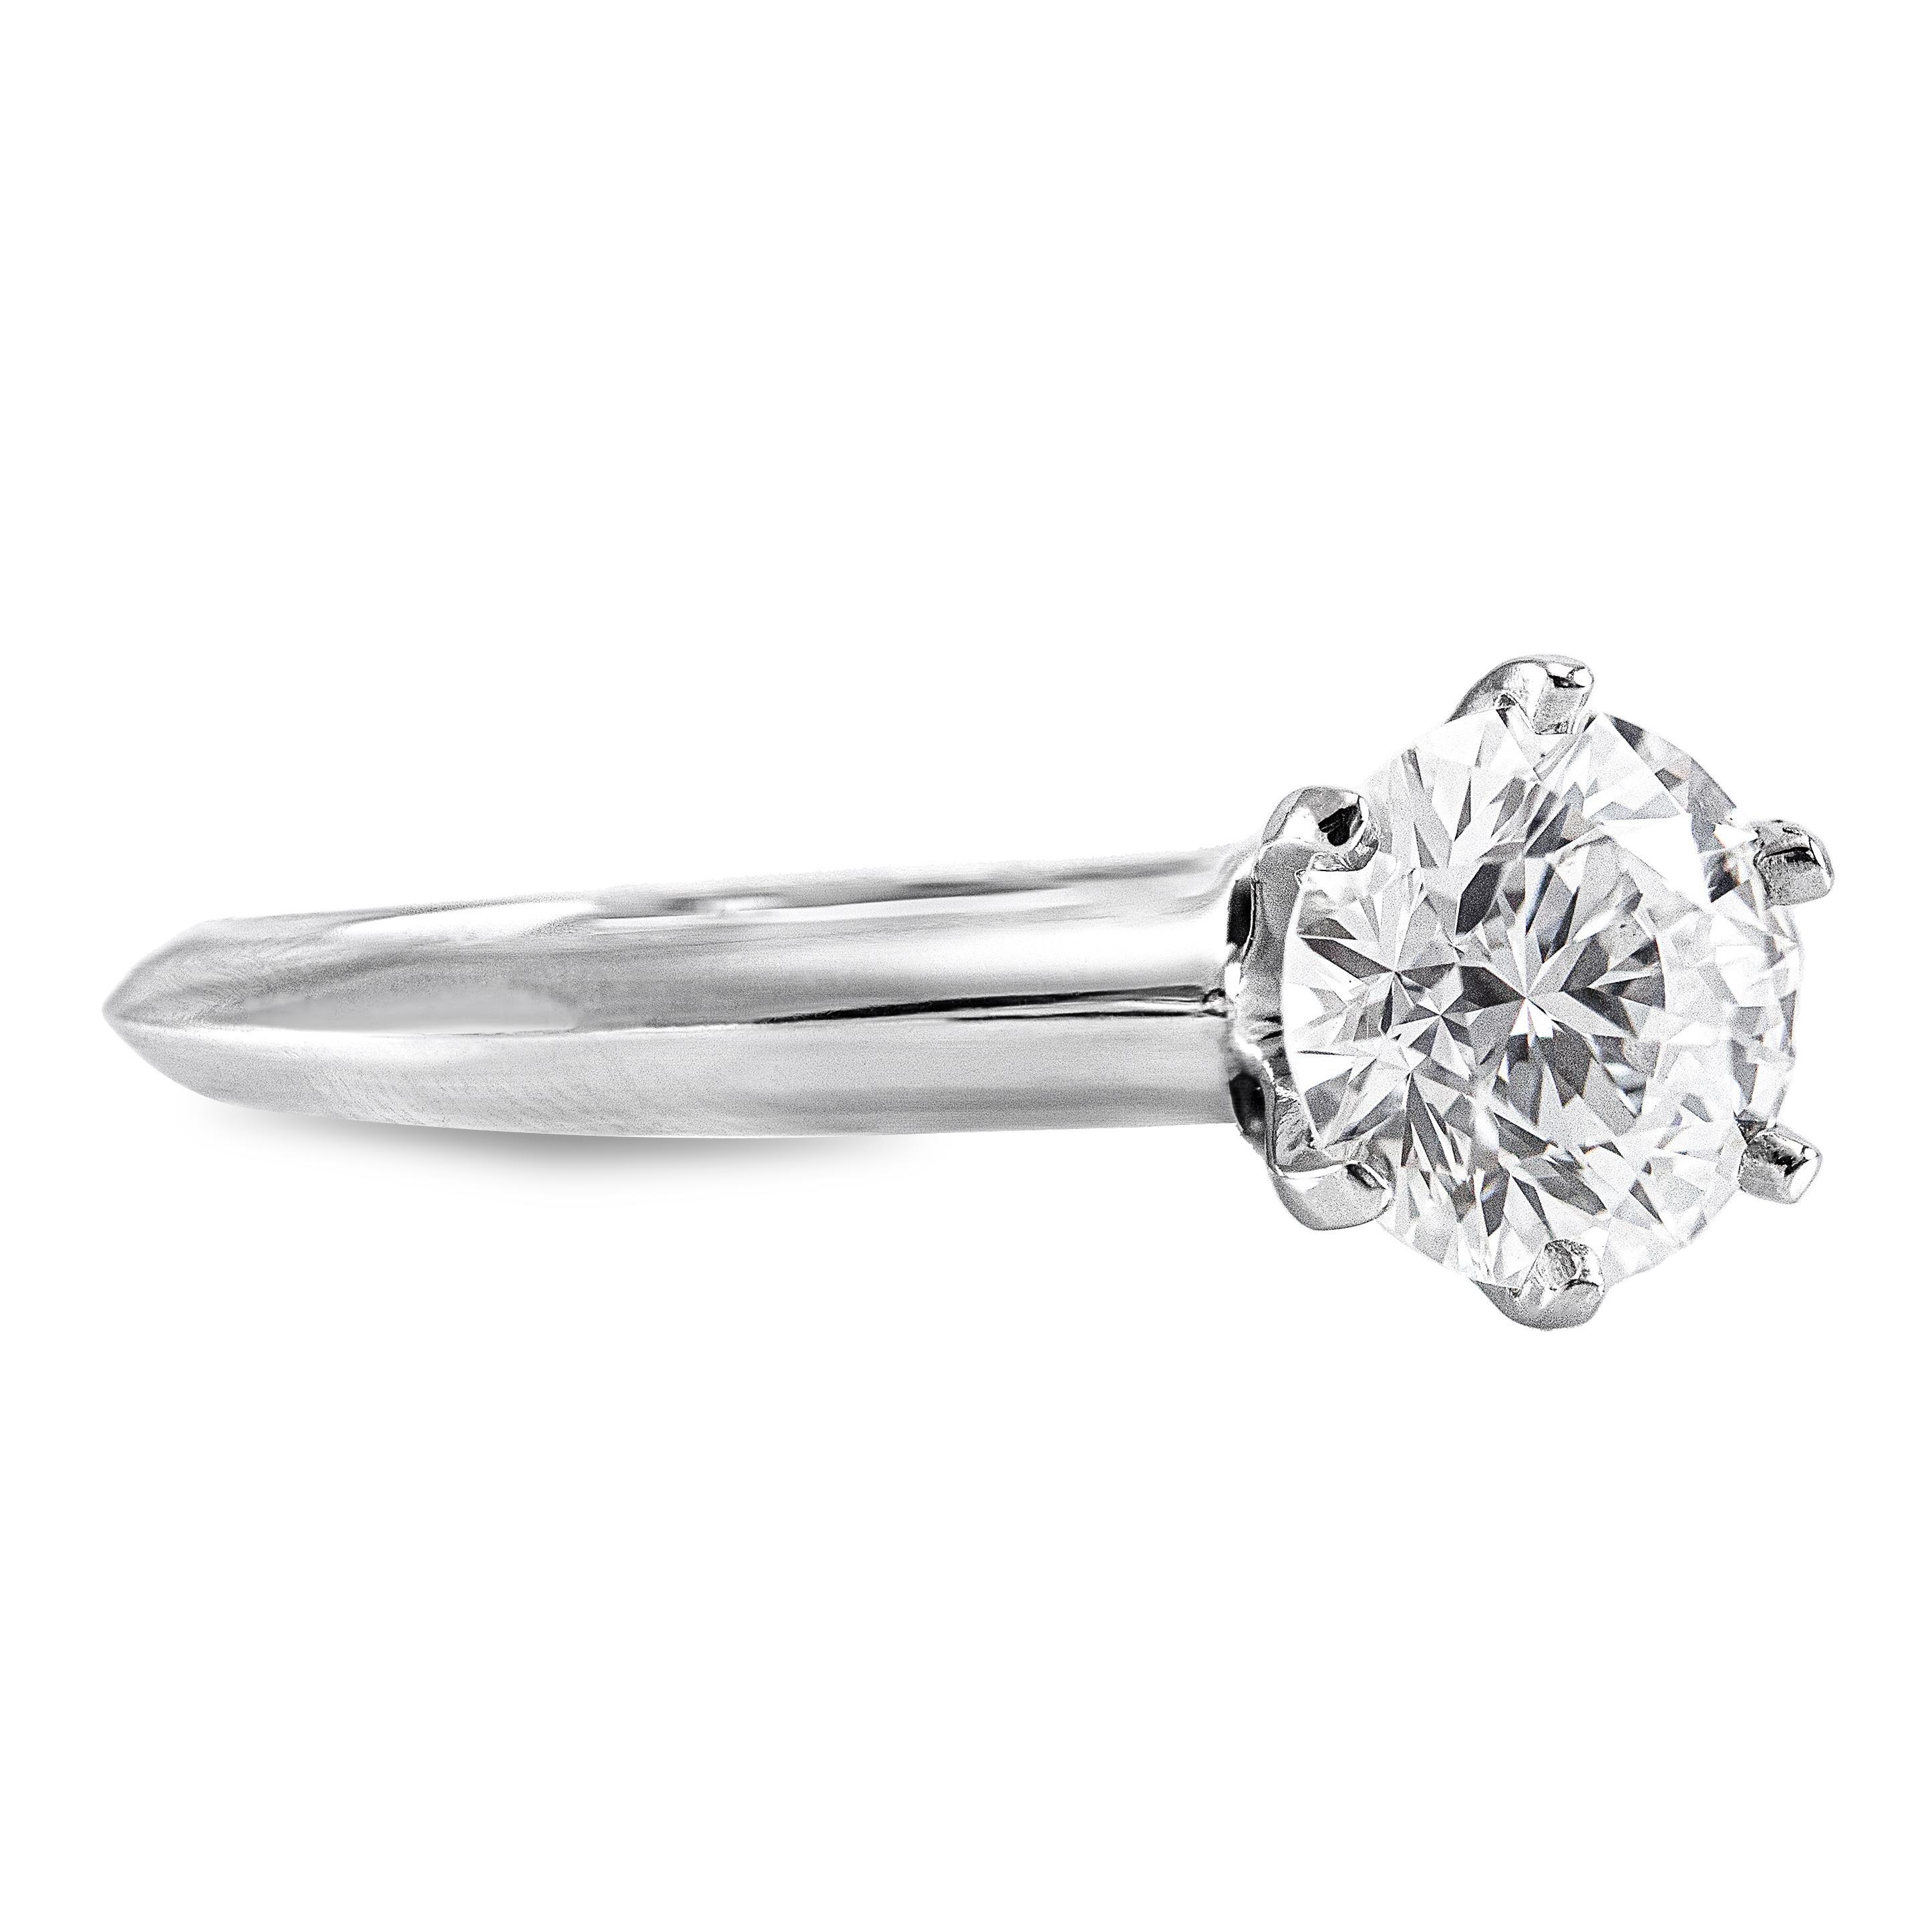 Classic Tiffany & Co Solitaire Diamond Platinum Engagement Ring

Center diamond 1.14ct F, VS1 GIA certified GIA # 12657480
The diamond is ideal-cut (Excellent in Cut, Polish & Symmetry)
6-prong Tiffany setting
Set in Platinum 950 
Signed and